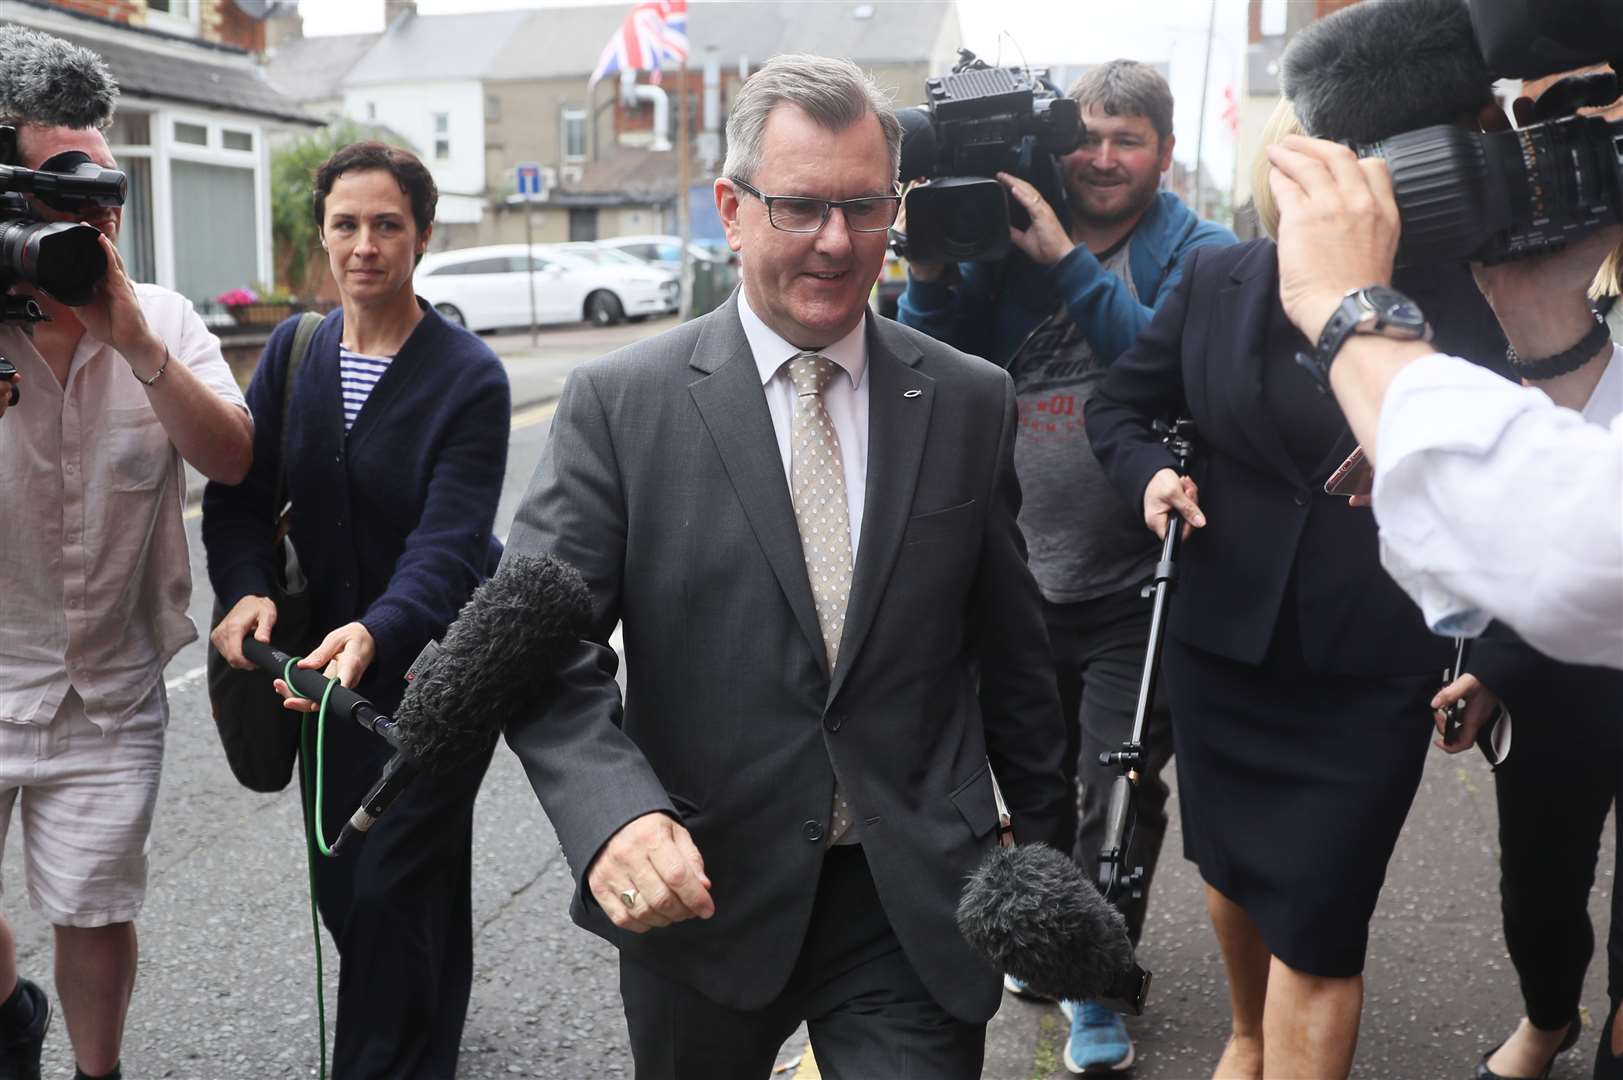 Sir Jeffrey Donaldson is the frontrunner to replace Edwin Poots as DUP leader, having lost out by just two votes in the previous contest. (Brian Lawless/PA)